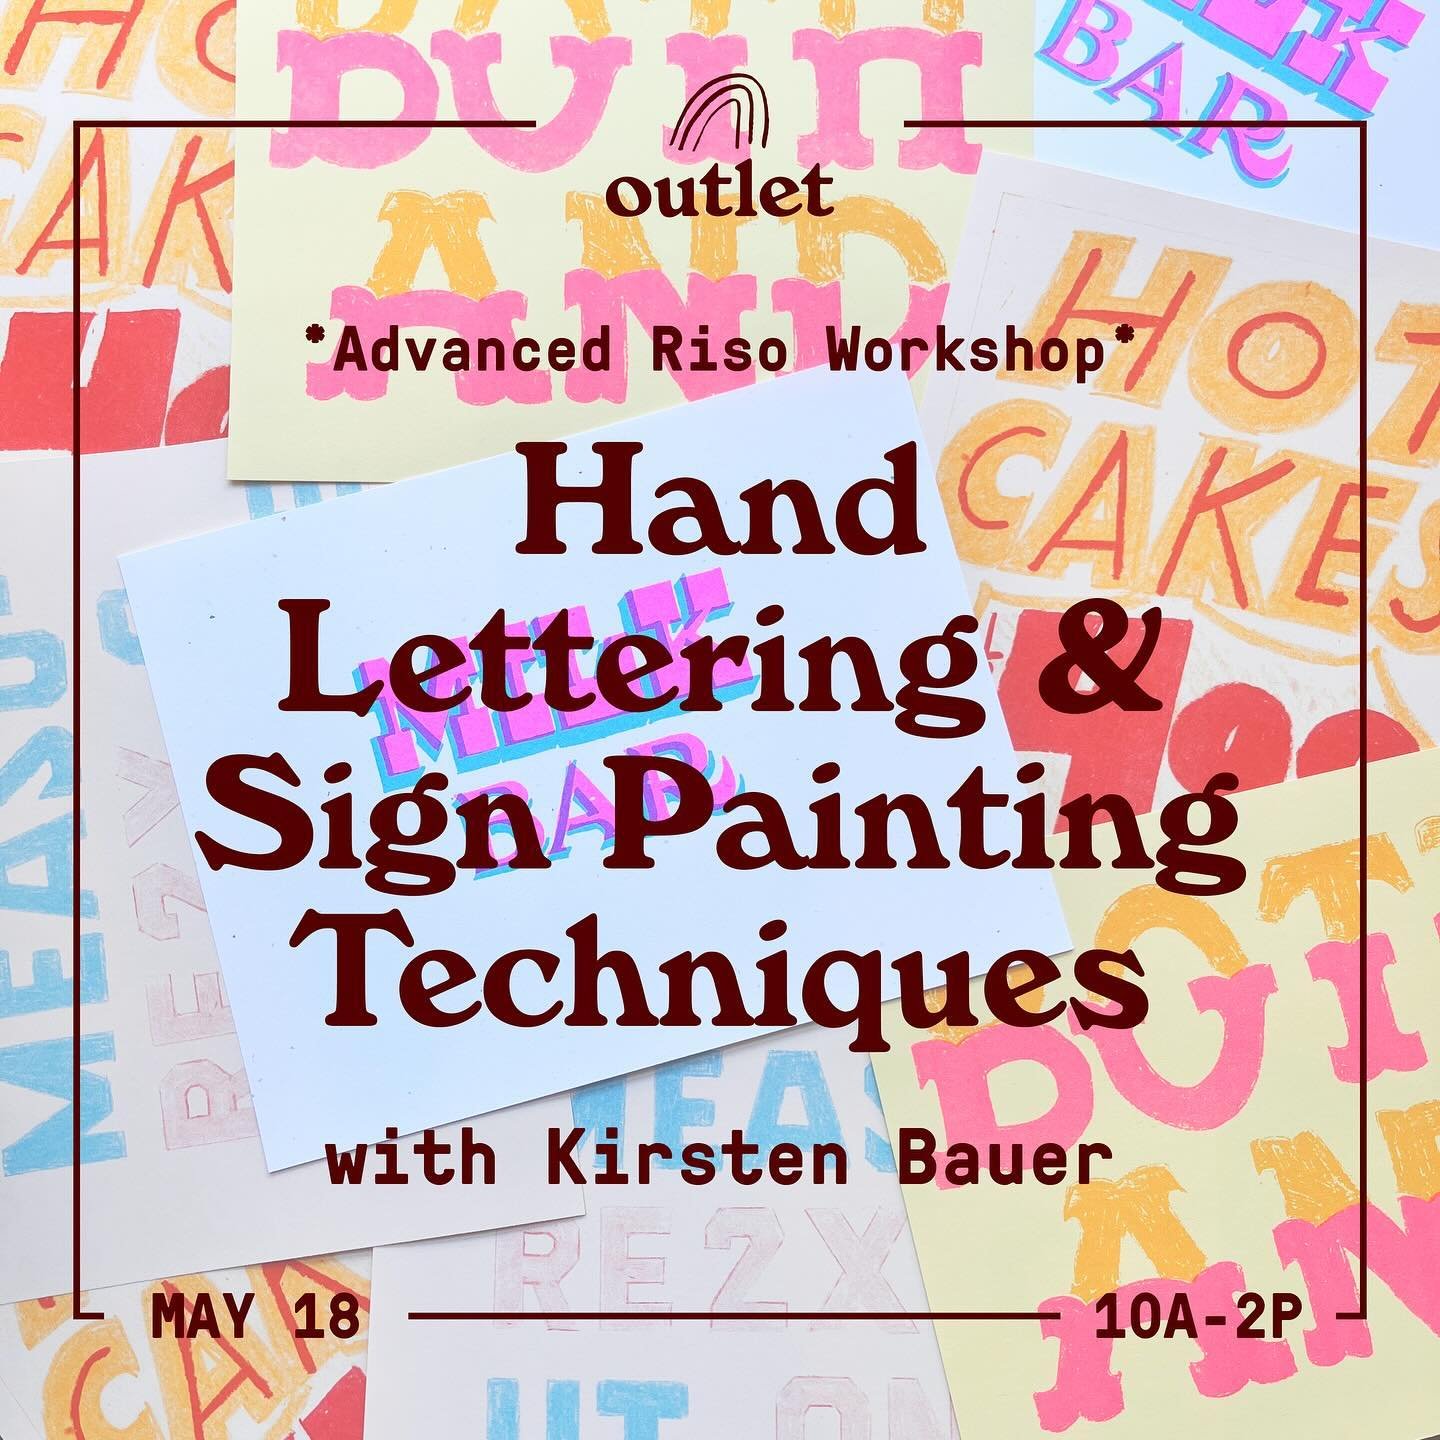 New workshop alert!! We&rsquo;re so excited to be partnering with our friend @kirsten.m.bauer for a hand lettering and sign painting for RISO class! Kirsten is the one who painted our beautiful new Outlet signs and we can&rsquo;t wait to have her her